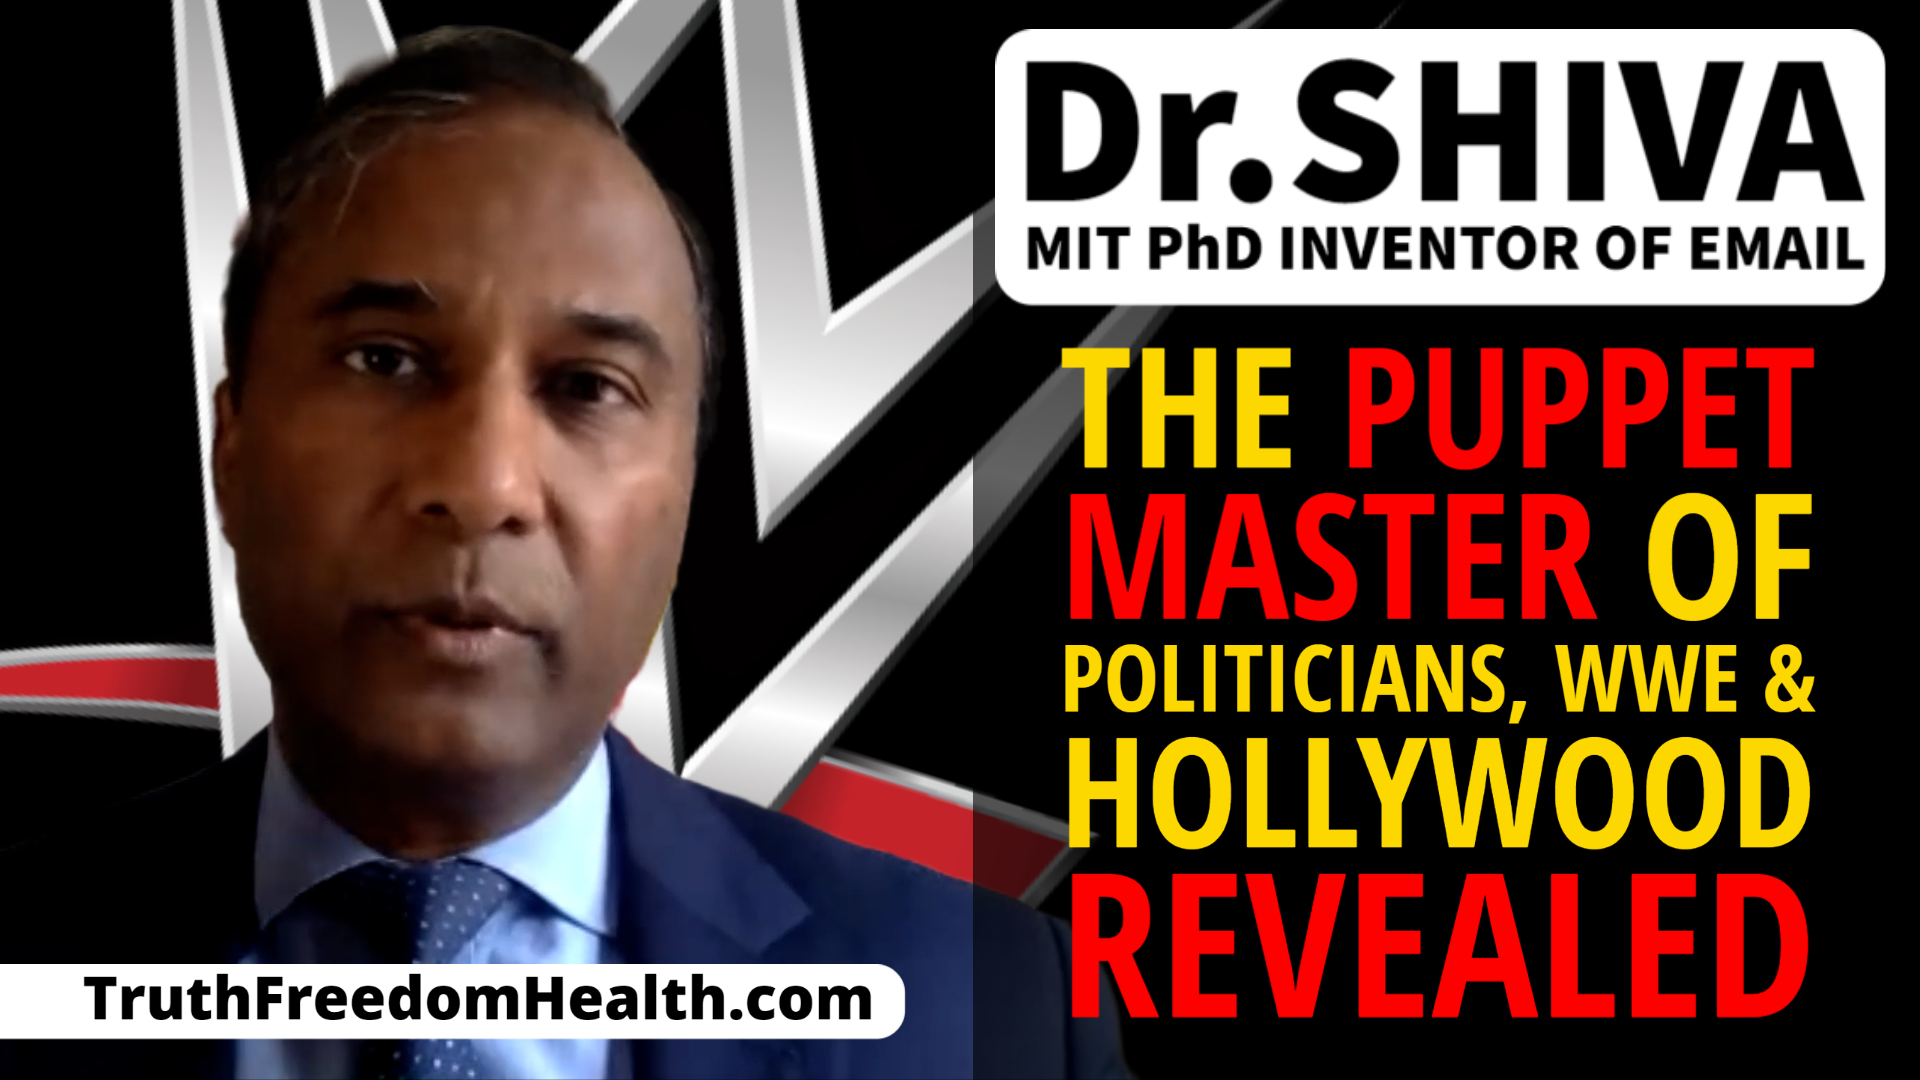 Dr.SHIVA: The Puppet Master of Politicians, WWE & Hollywood Revealed